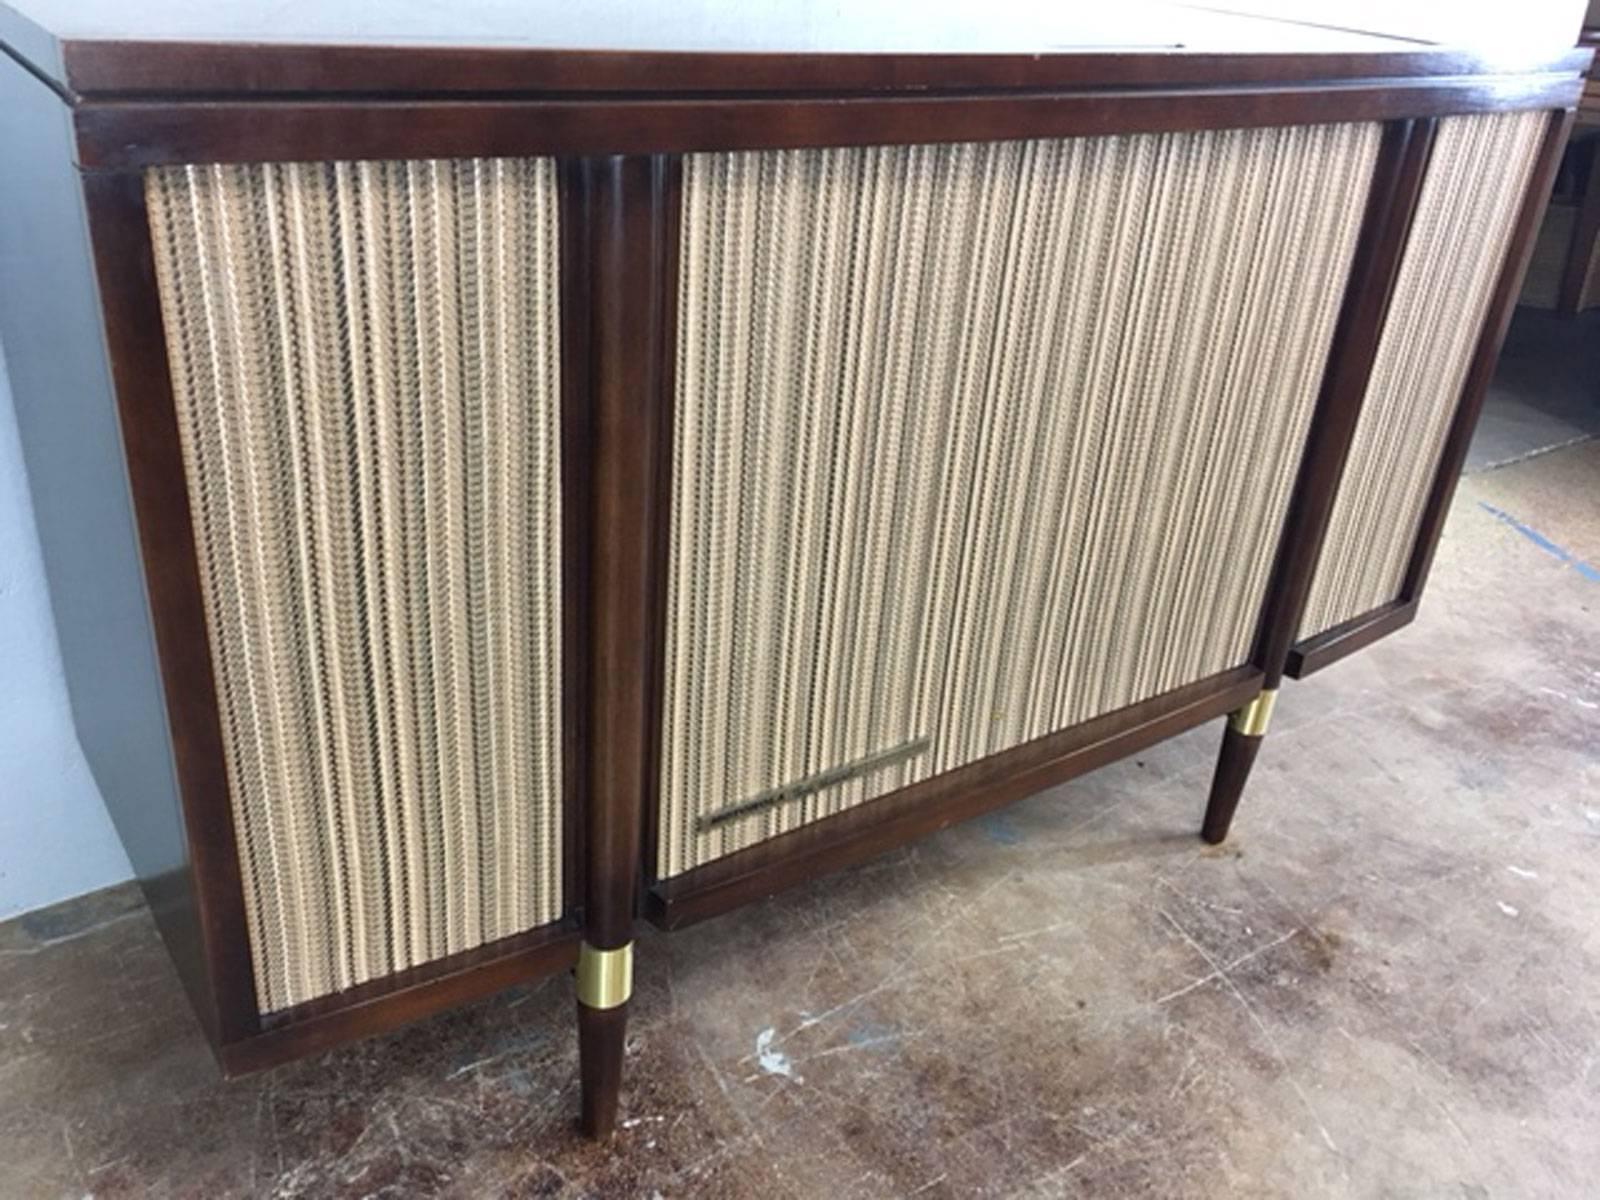 Motorola 3 channel stereophonic high fidelity stereo console. Original condition outside. The inside stereo components, however, have all been professionally serviced and are in excellent working order. Woofer in centre and woofers and tweeters on